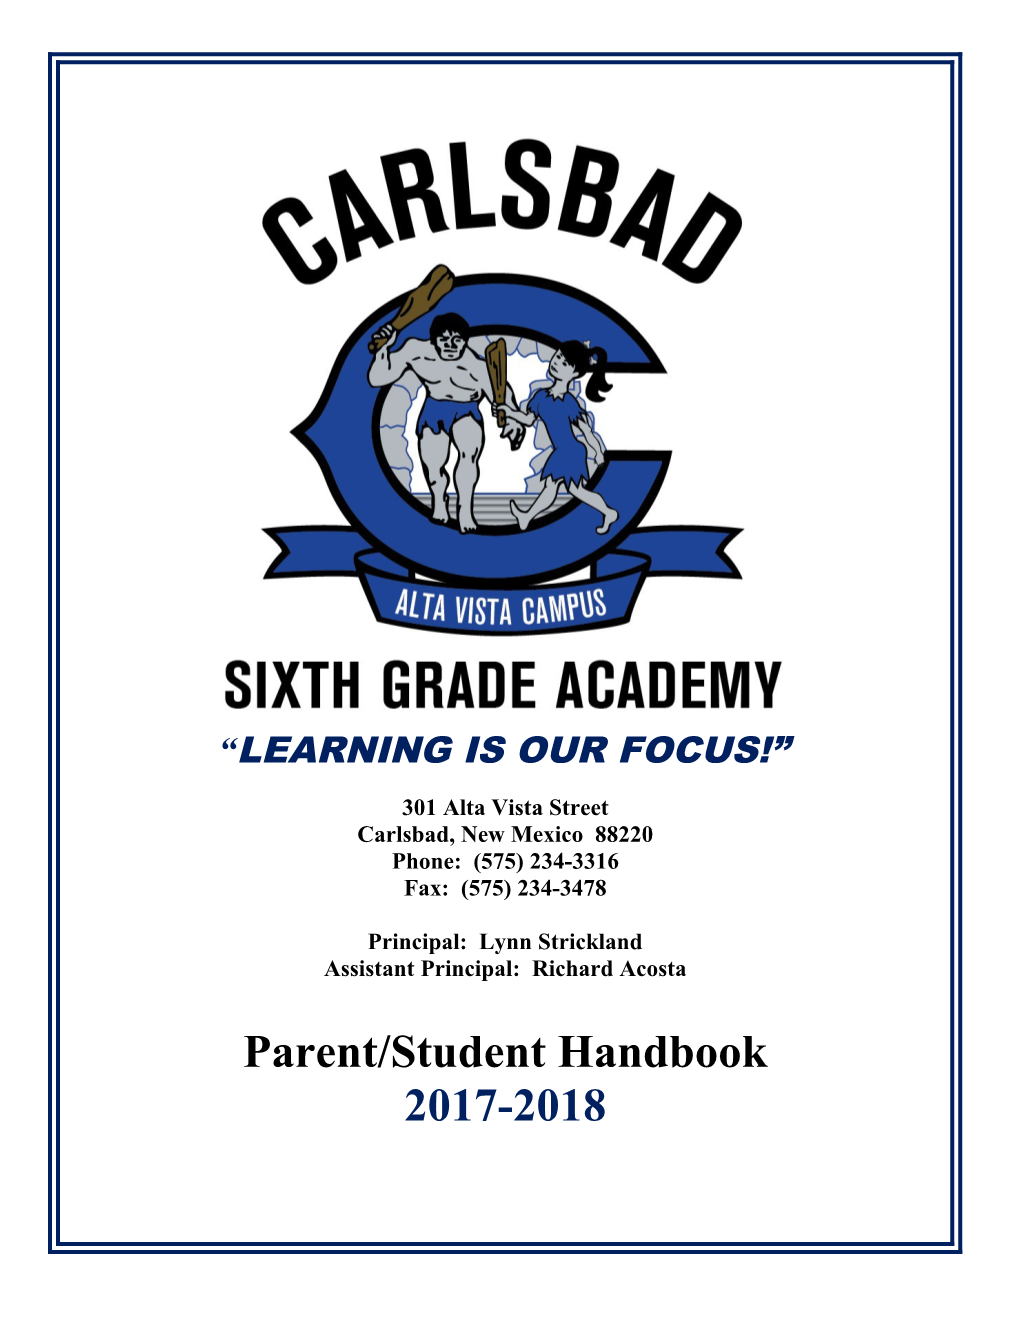 Carlsbad Board of Education Mission Statement